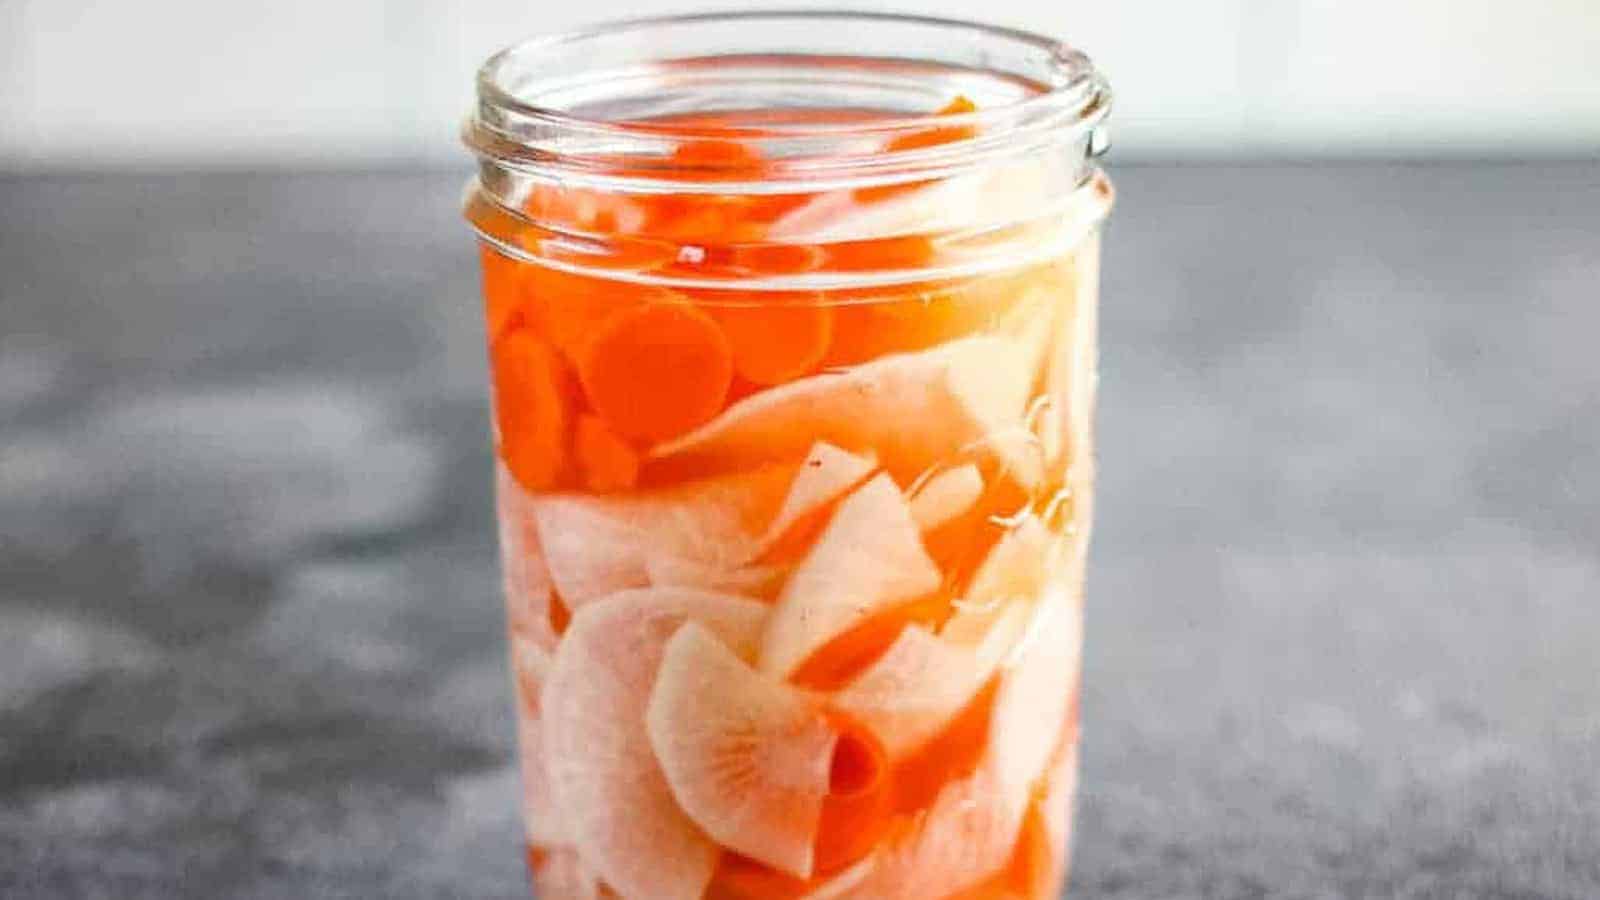 Low angle shot of a jar of pickled daikon radish and carrots.